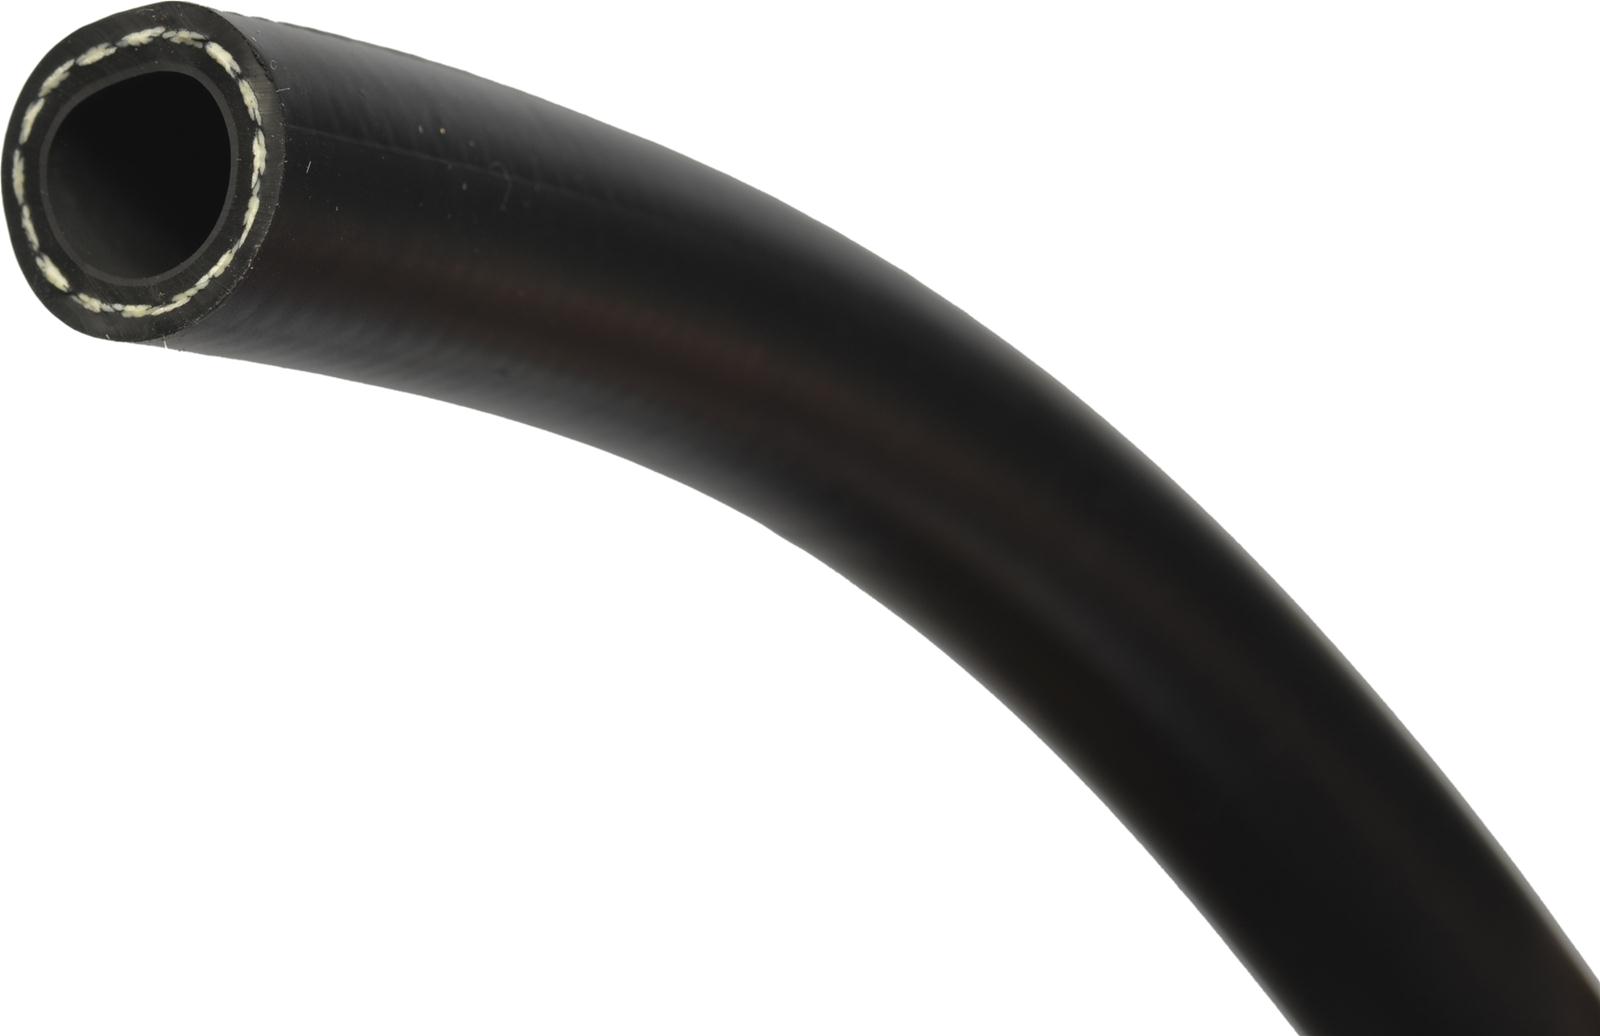 Buyer's Guide: How to Pick the Best Flexible Fuel Hose for Your